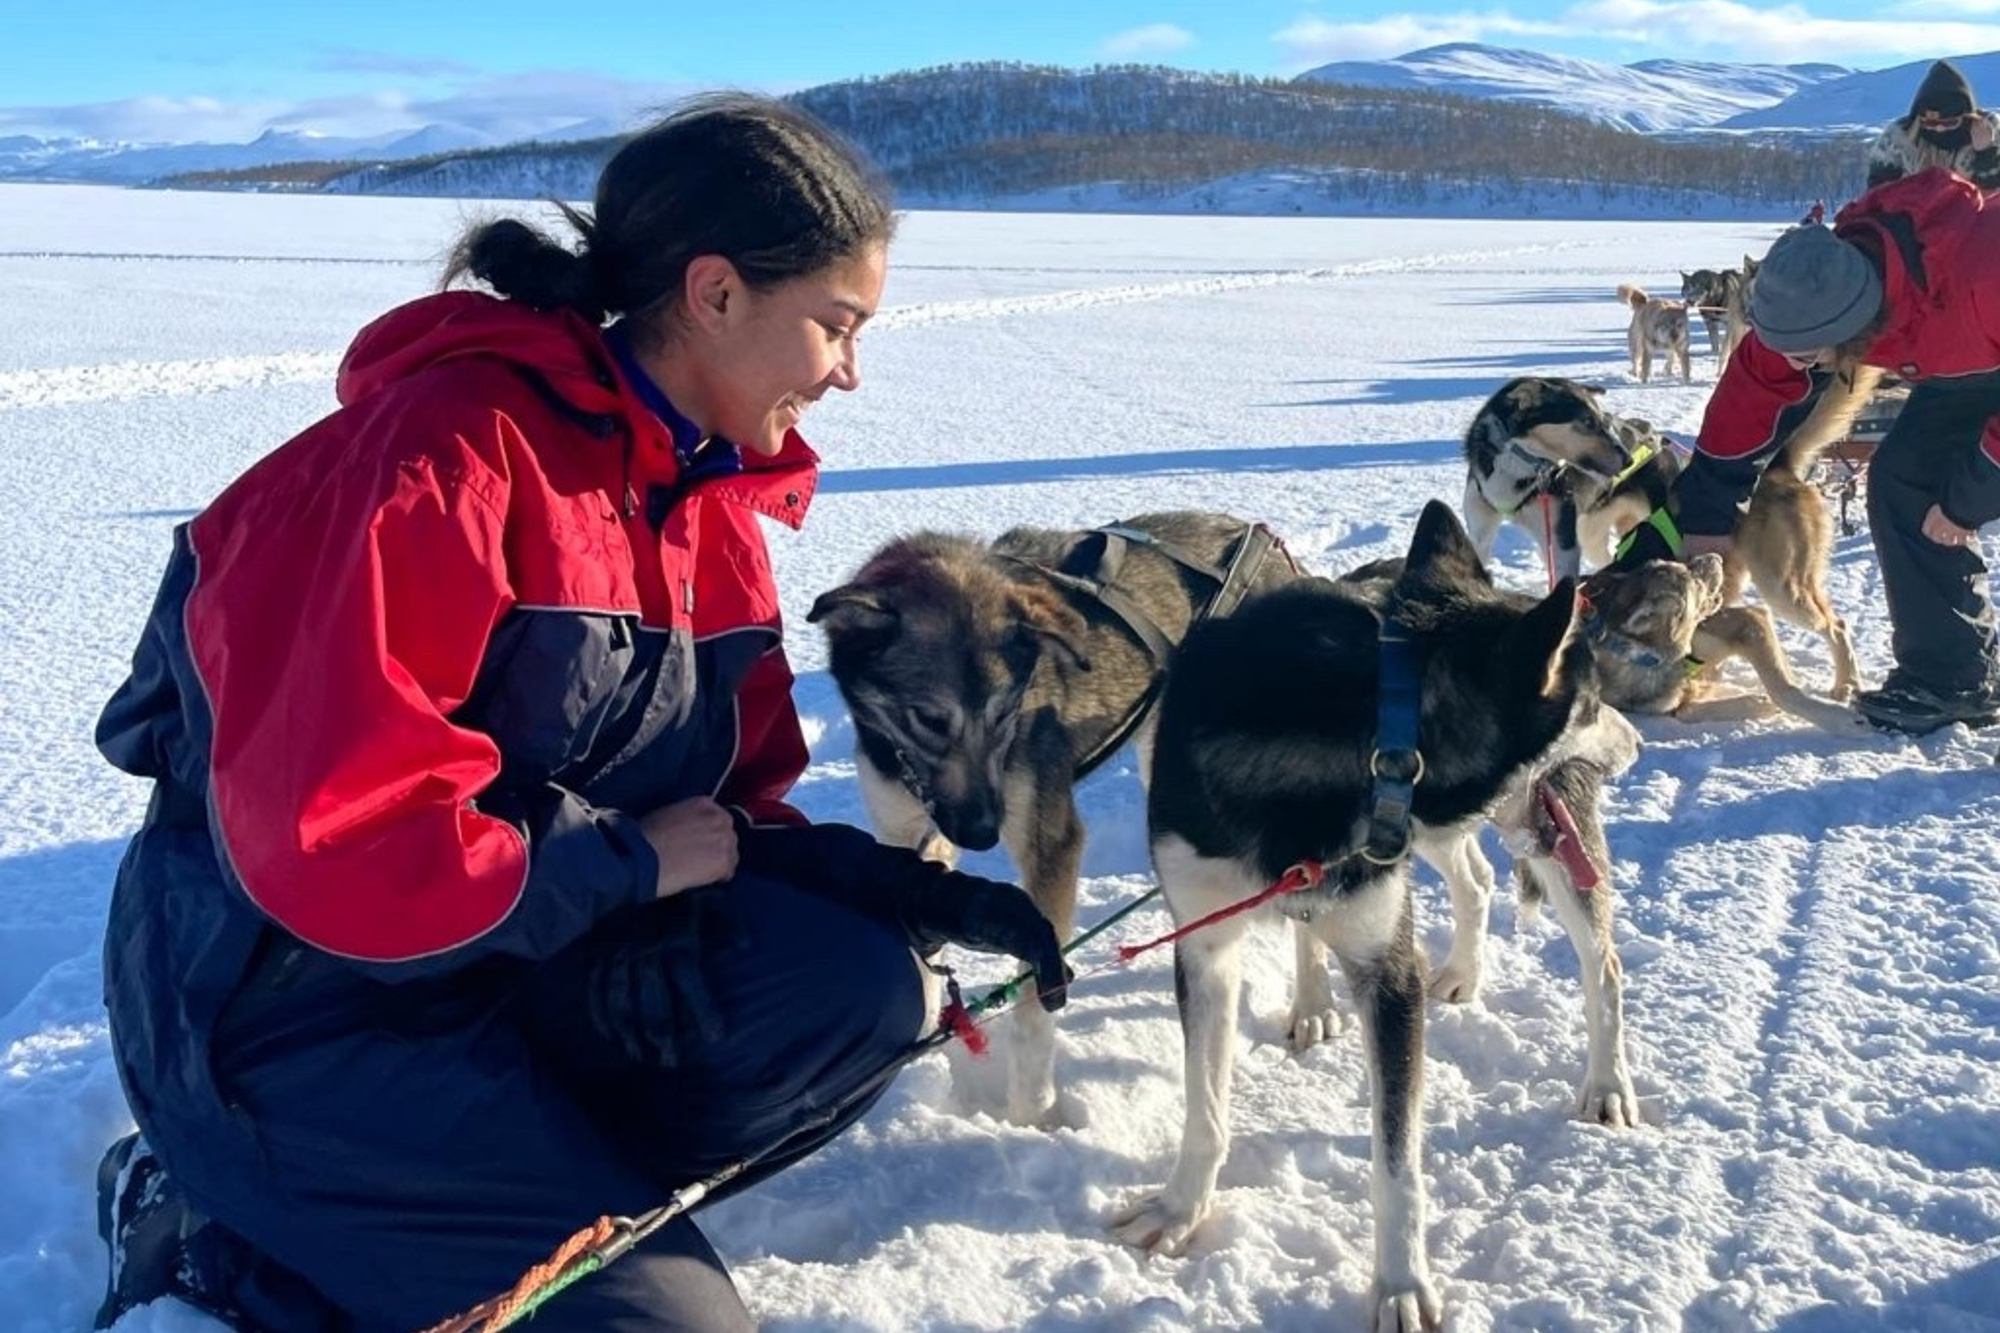 Kiersten Thomas crouching in snow with dogs attached to dogsled on frozen tundra with mountains in the background